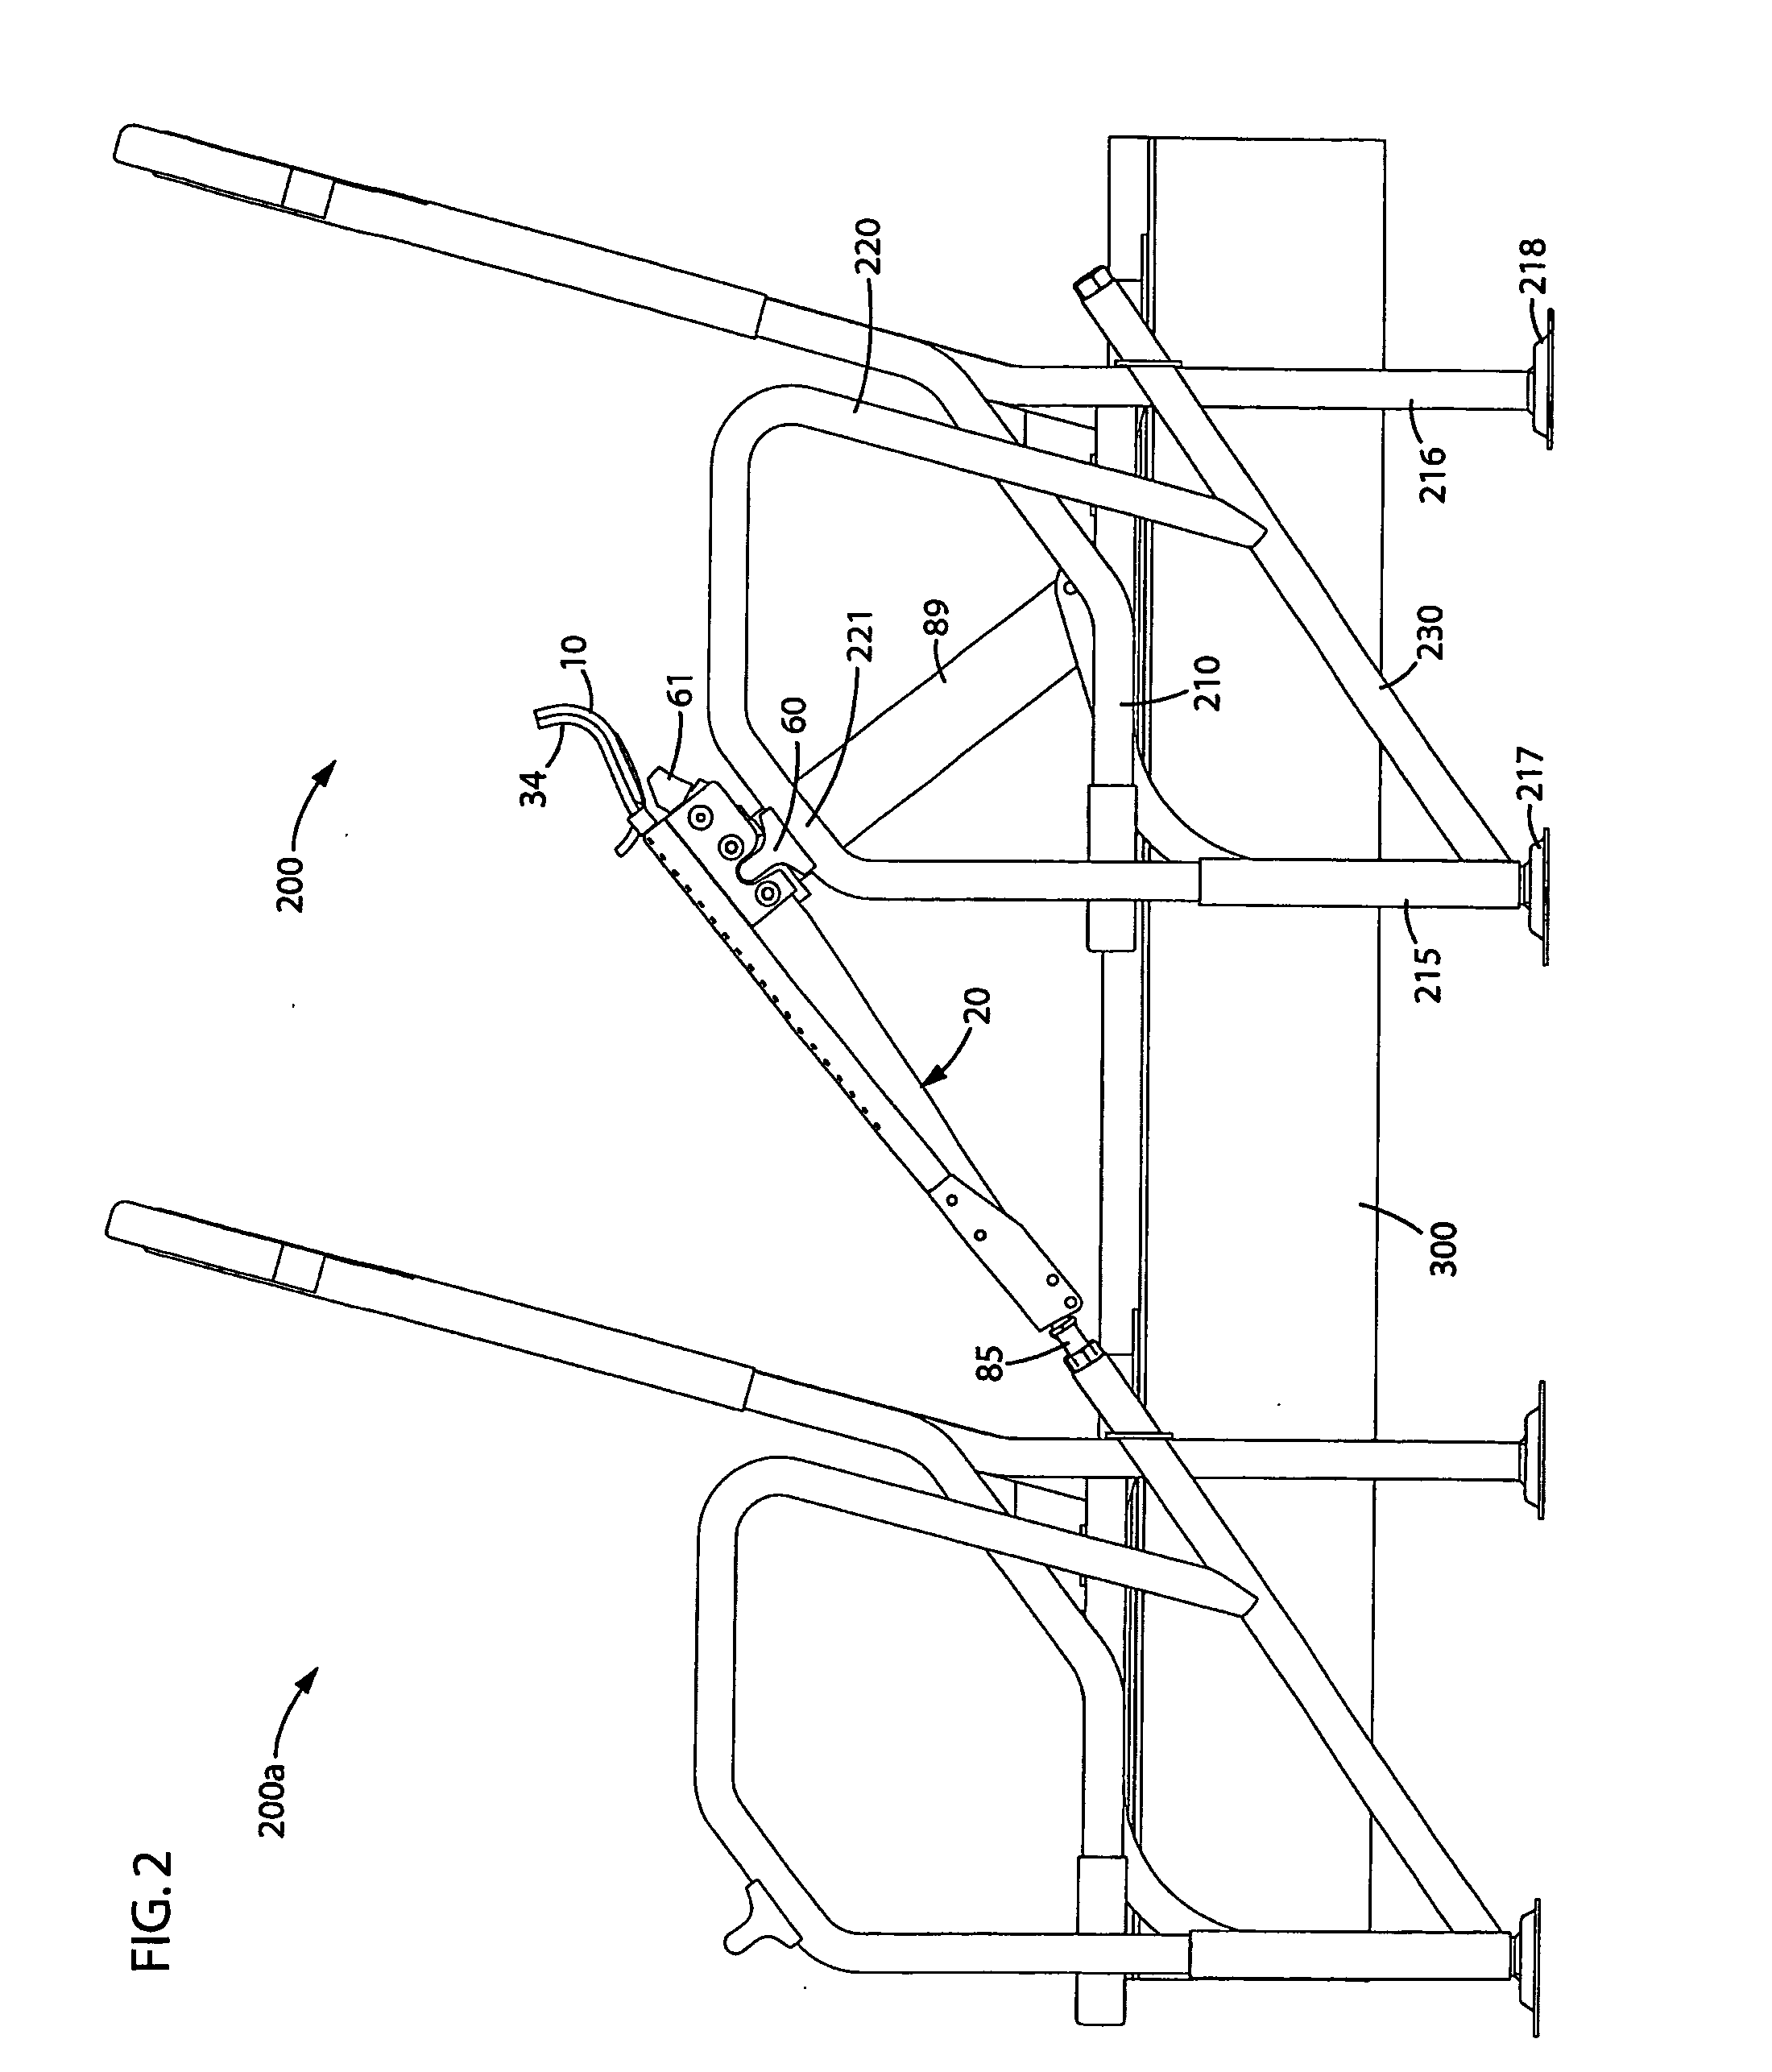 Energy absorption device and passenger safety crossbar system incorporating same